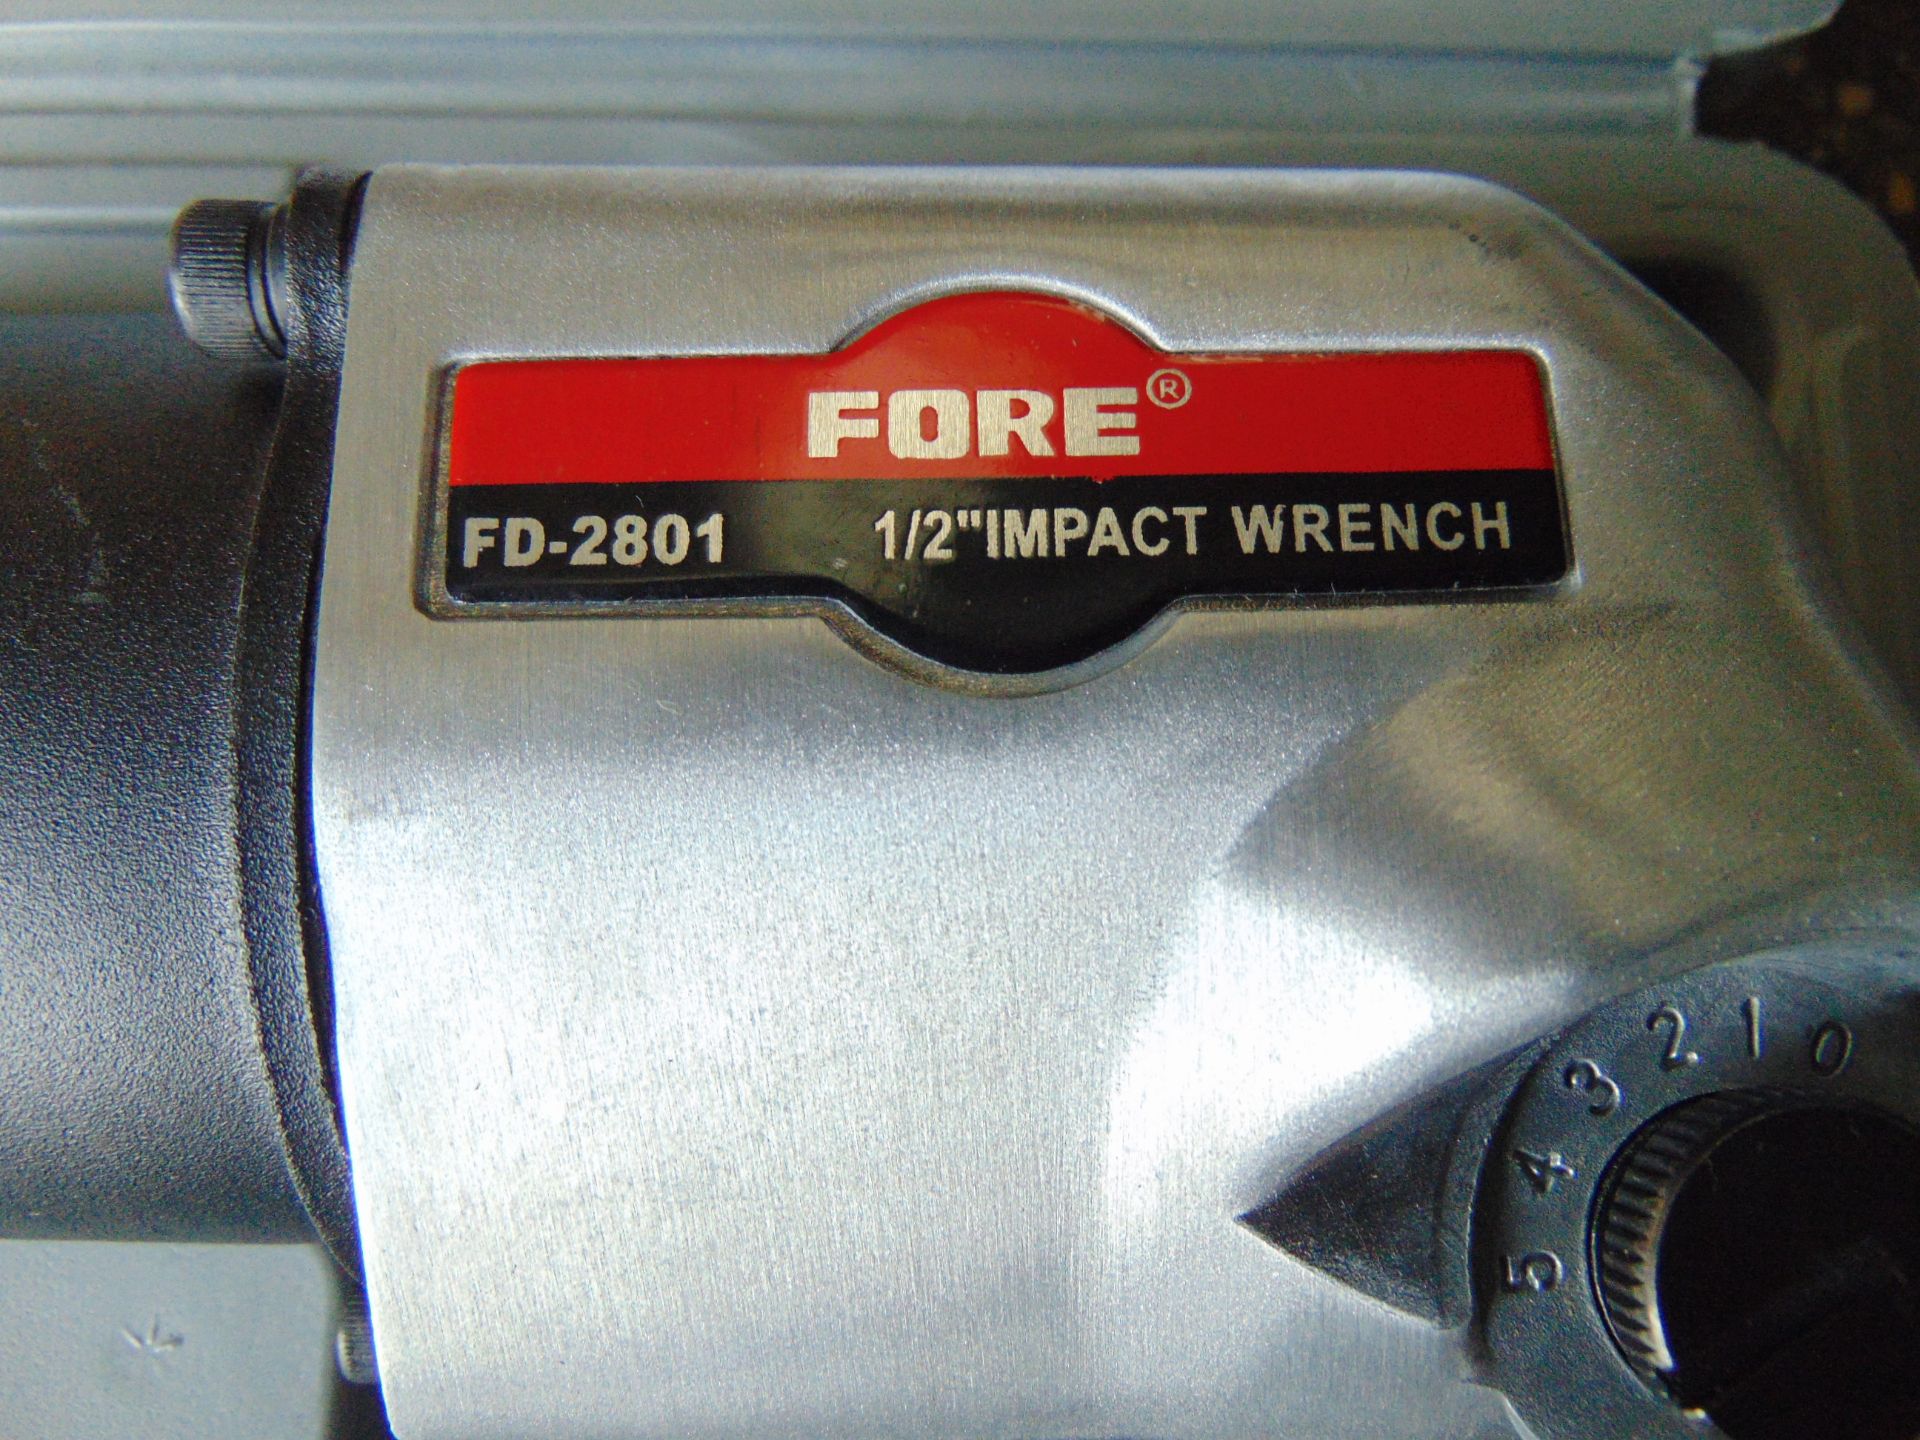 New and Unused Fore 1/2" Impact Wrench - Image 3 of 7